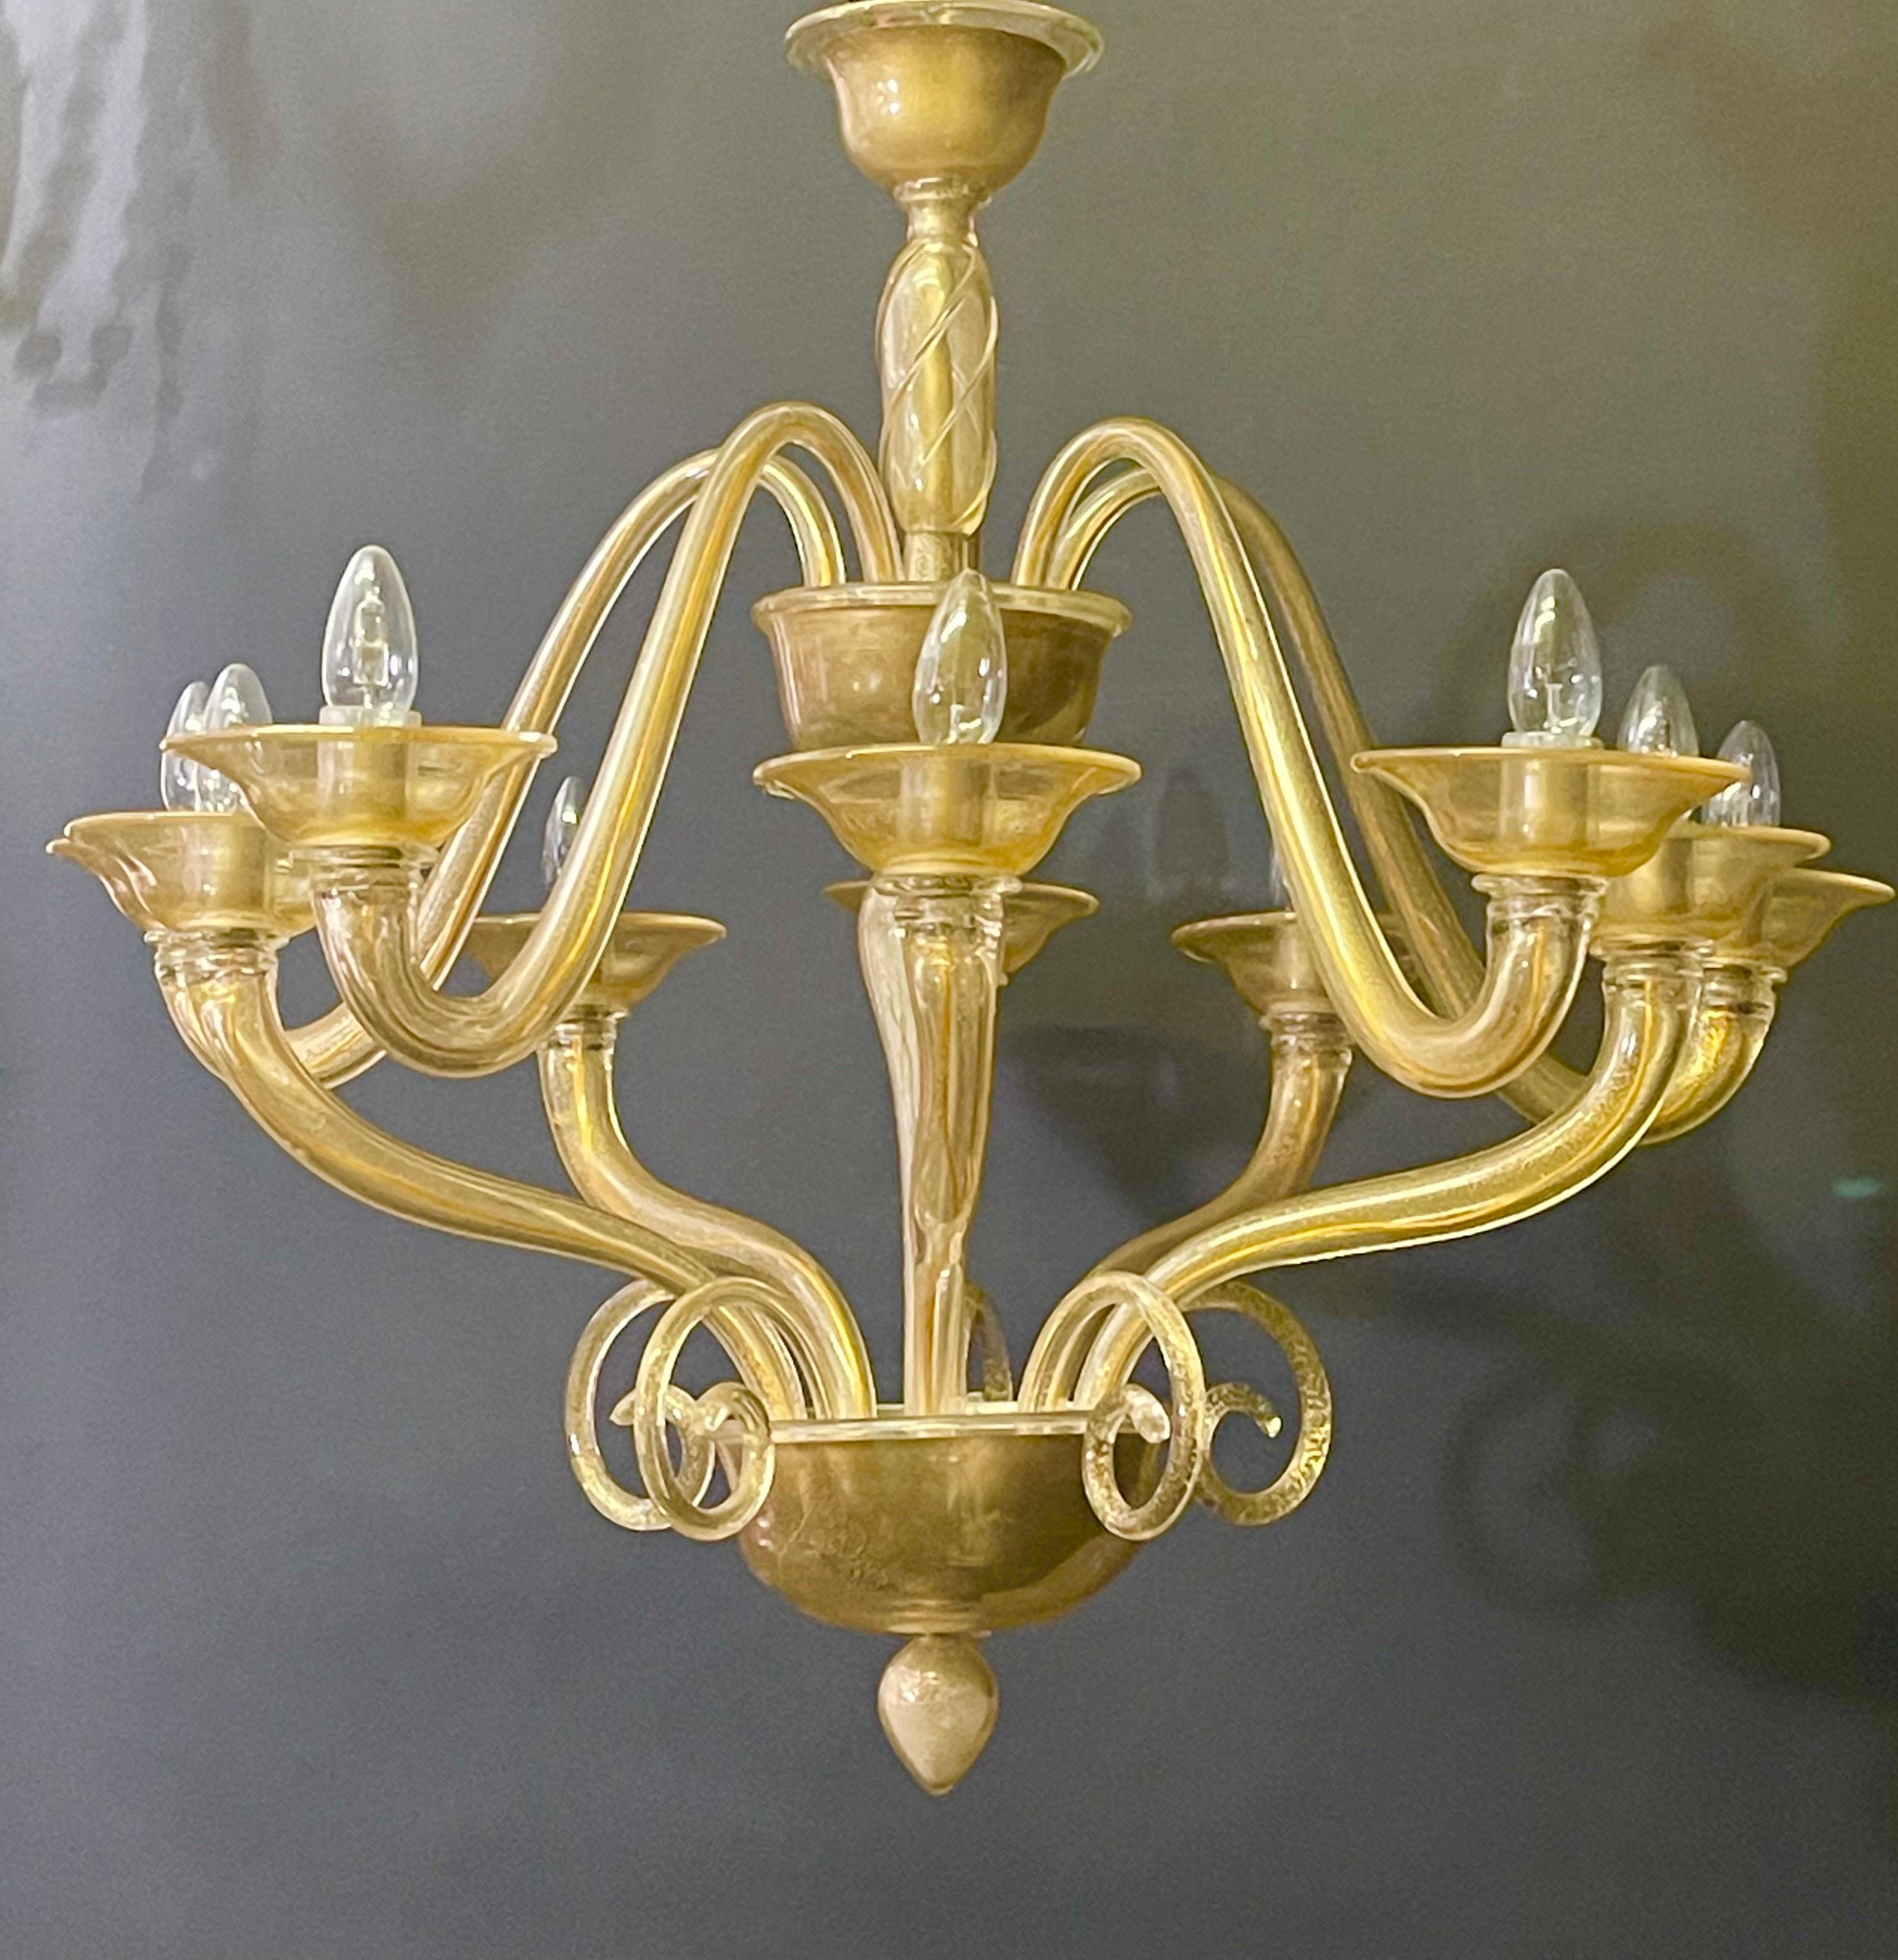 Gold Dusted Handblown Murano Glass Chandelier by Seguso, circa 1960s For Sale 3